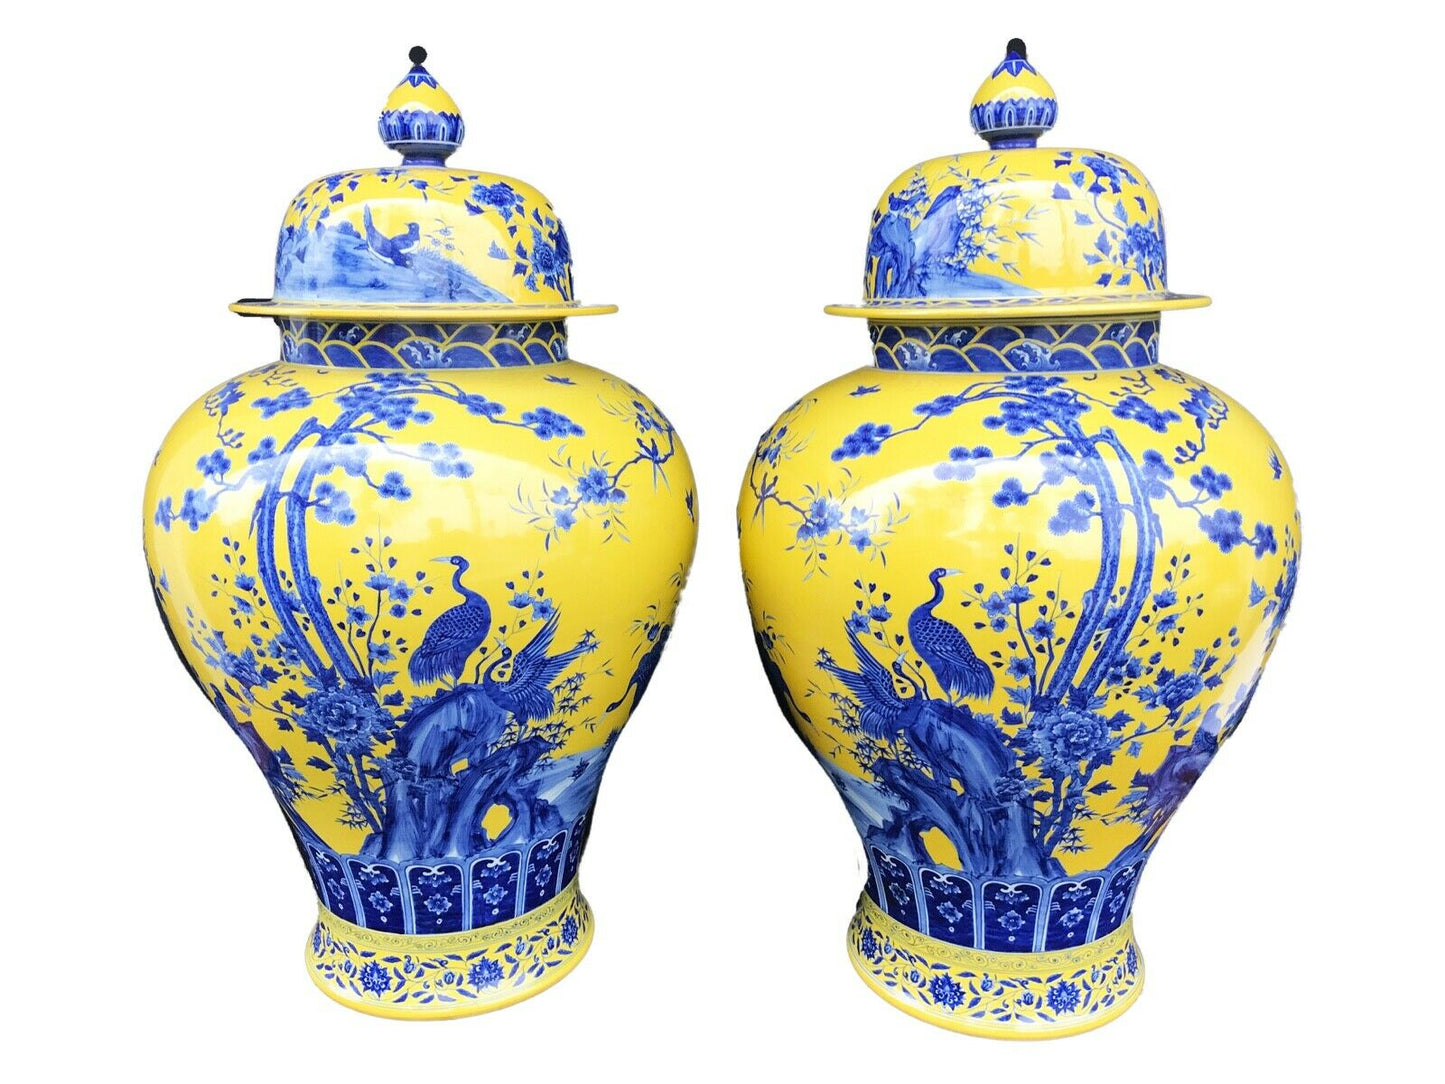 #2367 Museum Quality Lg Chinese Famille Jaune Ginger Jars - a Pair 30.75" H by 17.5" D